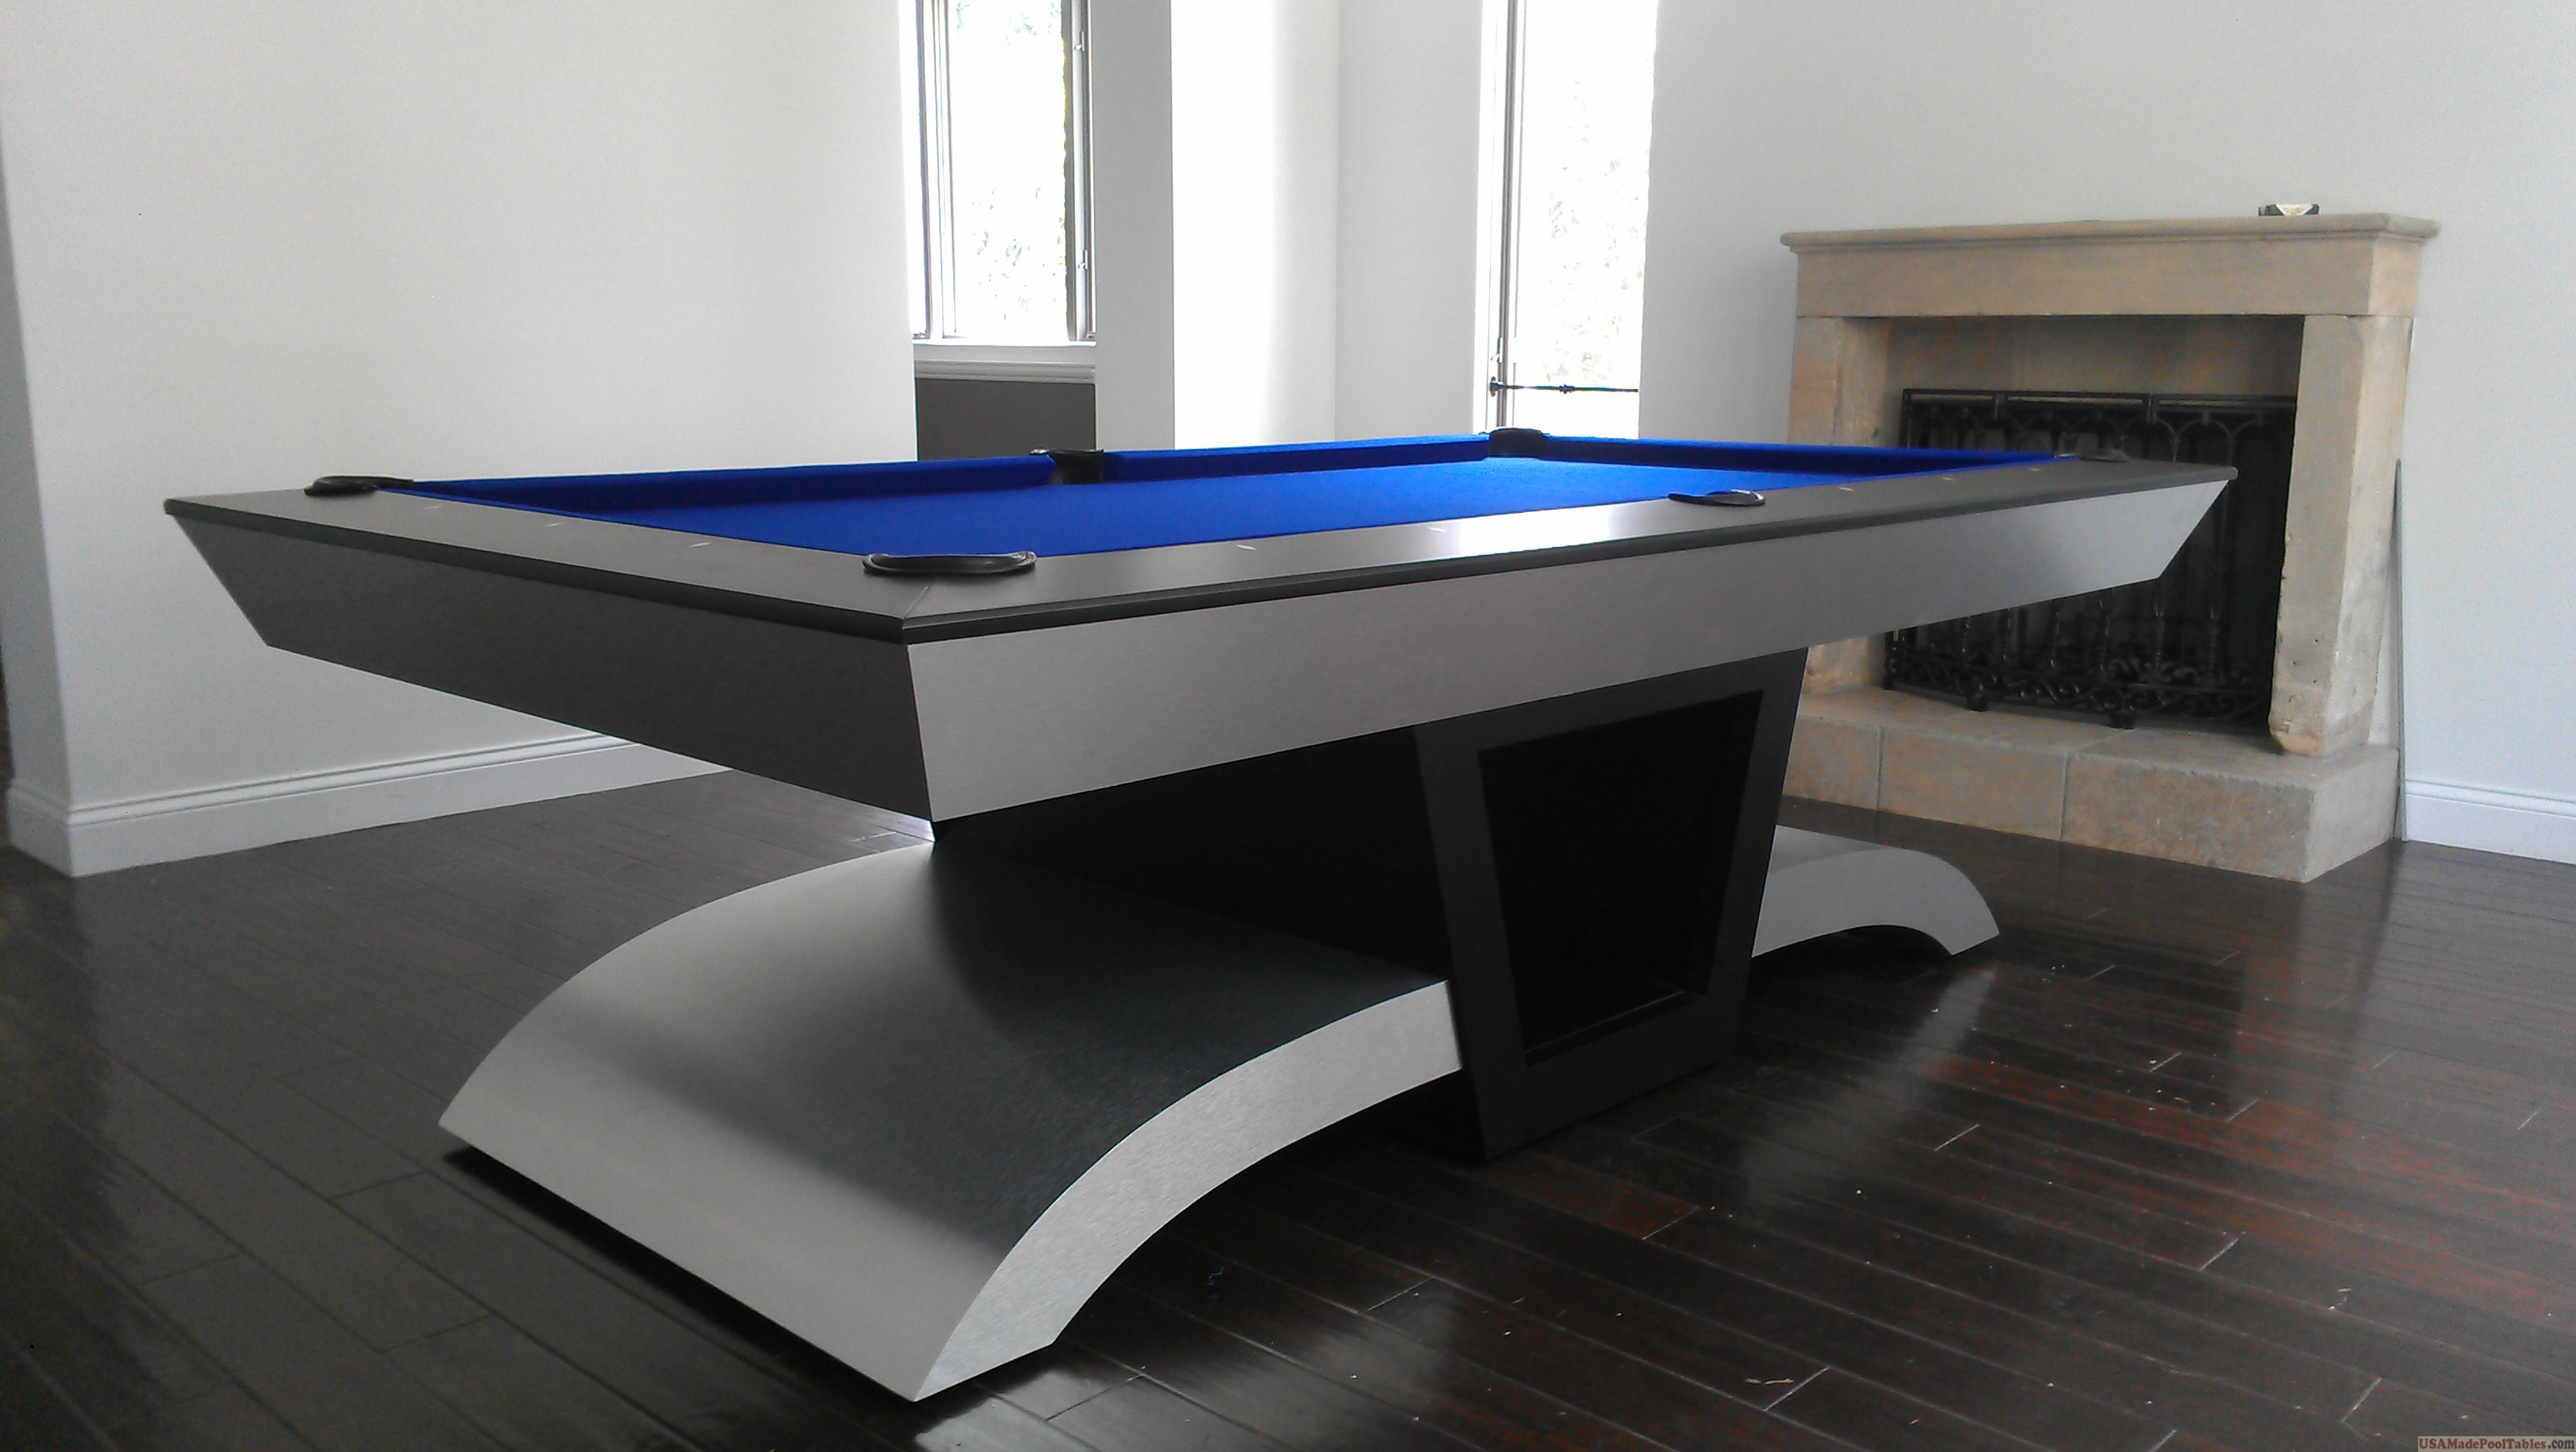 INFINITY CONTEMPORARY POOL TABLES FOR SALE : POOL TABLES CONTEMPORARY ...